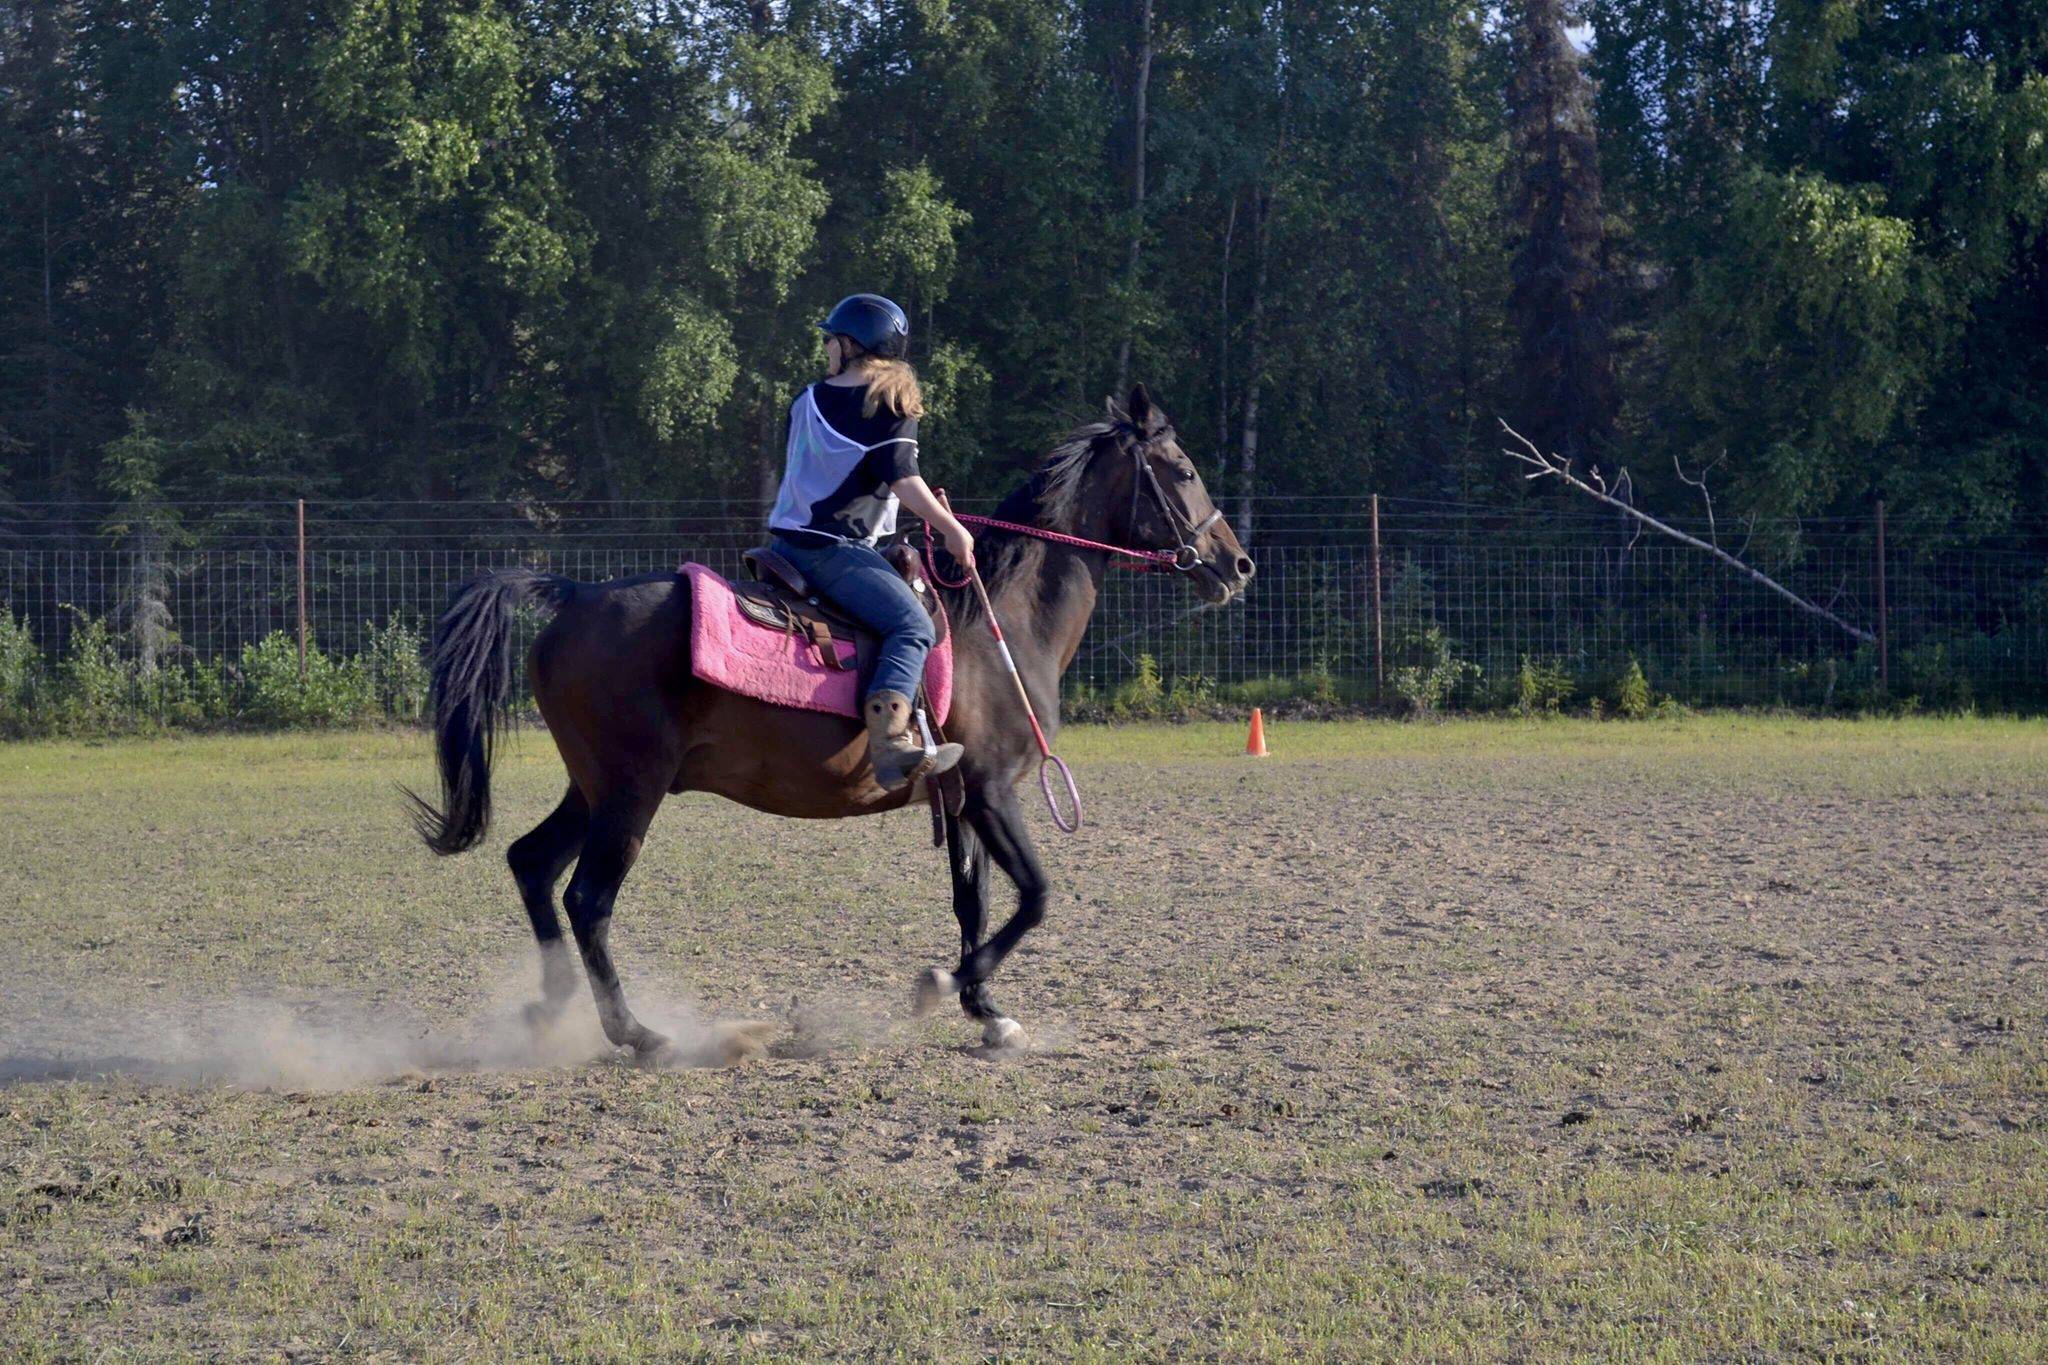 Photo by Victoria Petersen/Peninsula Clarion                                 A group of riders engage in a game of polocrosse, a sport combining rules of polo and lacrosse, Thursday, near Soldotna.